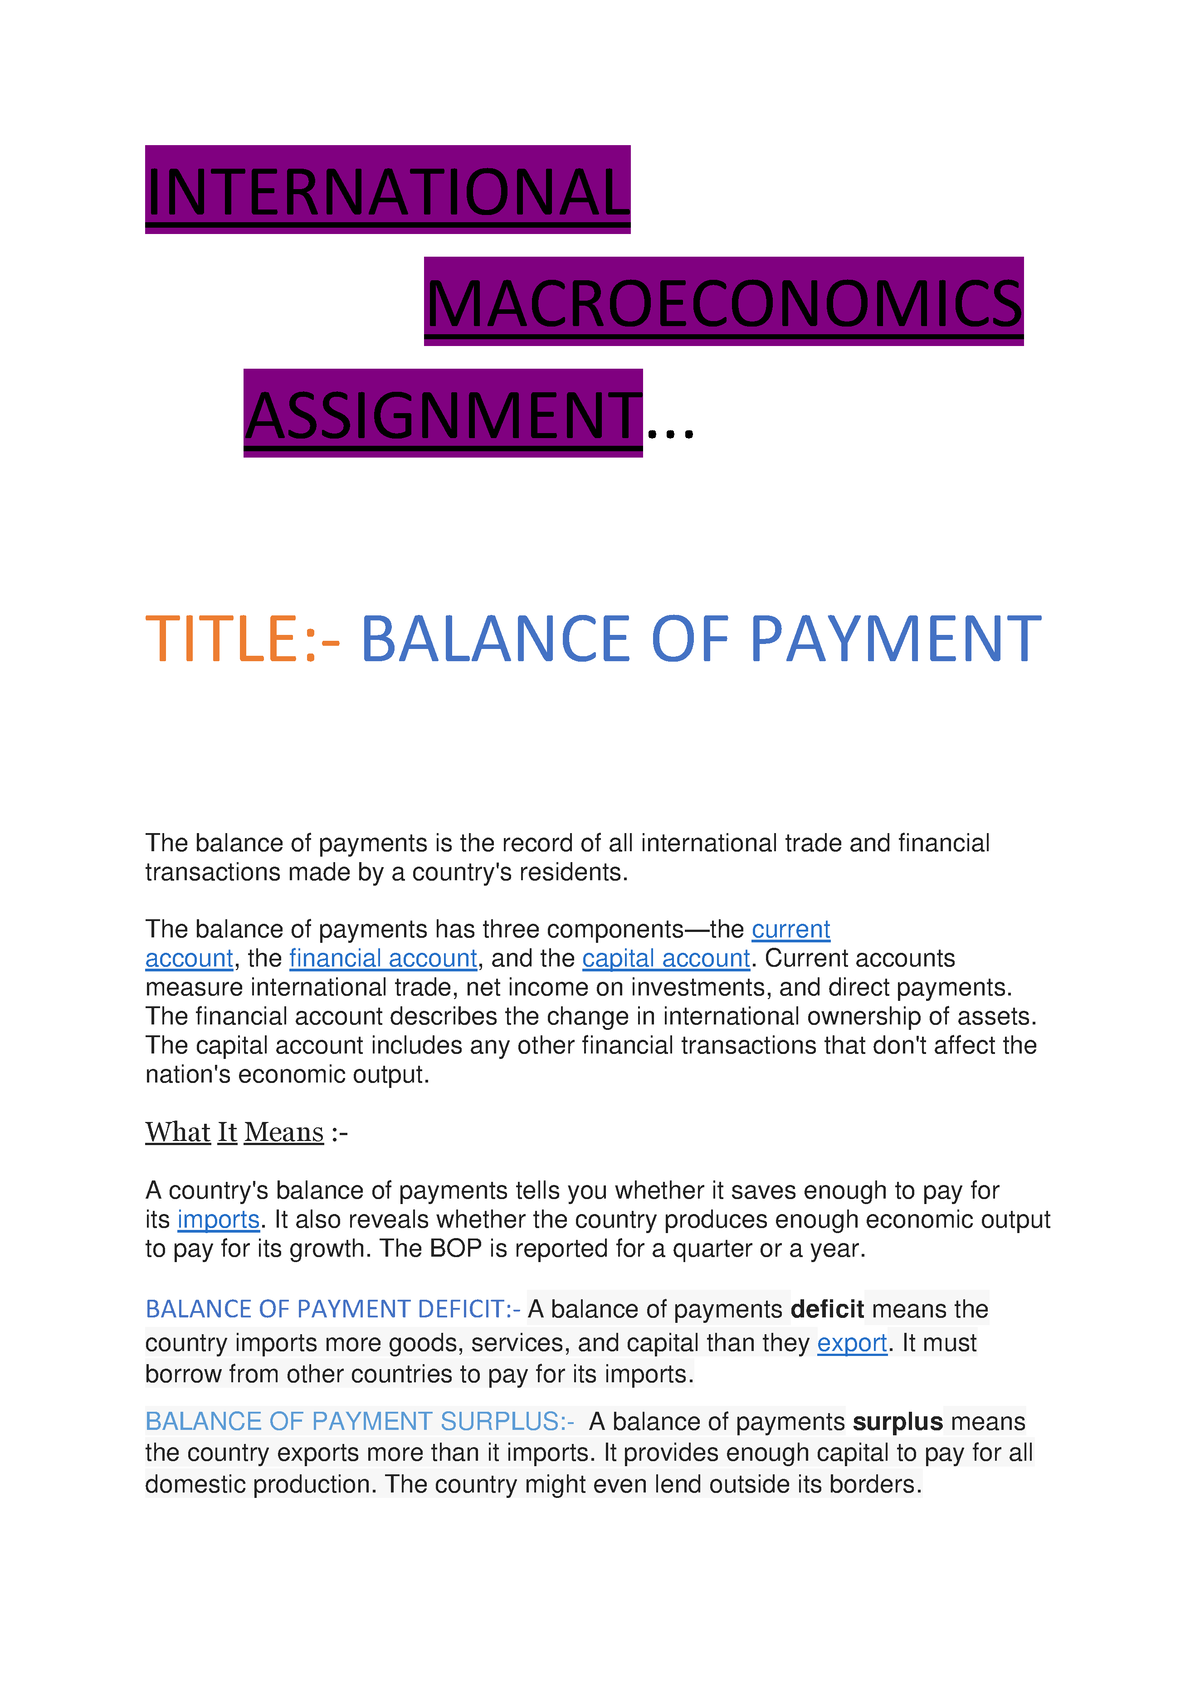 payment assignment meaning